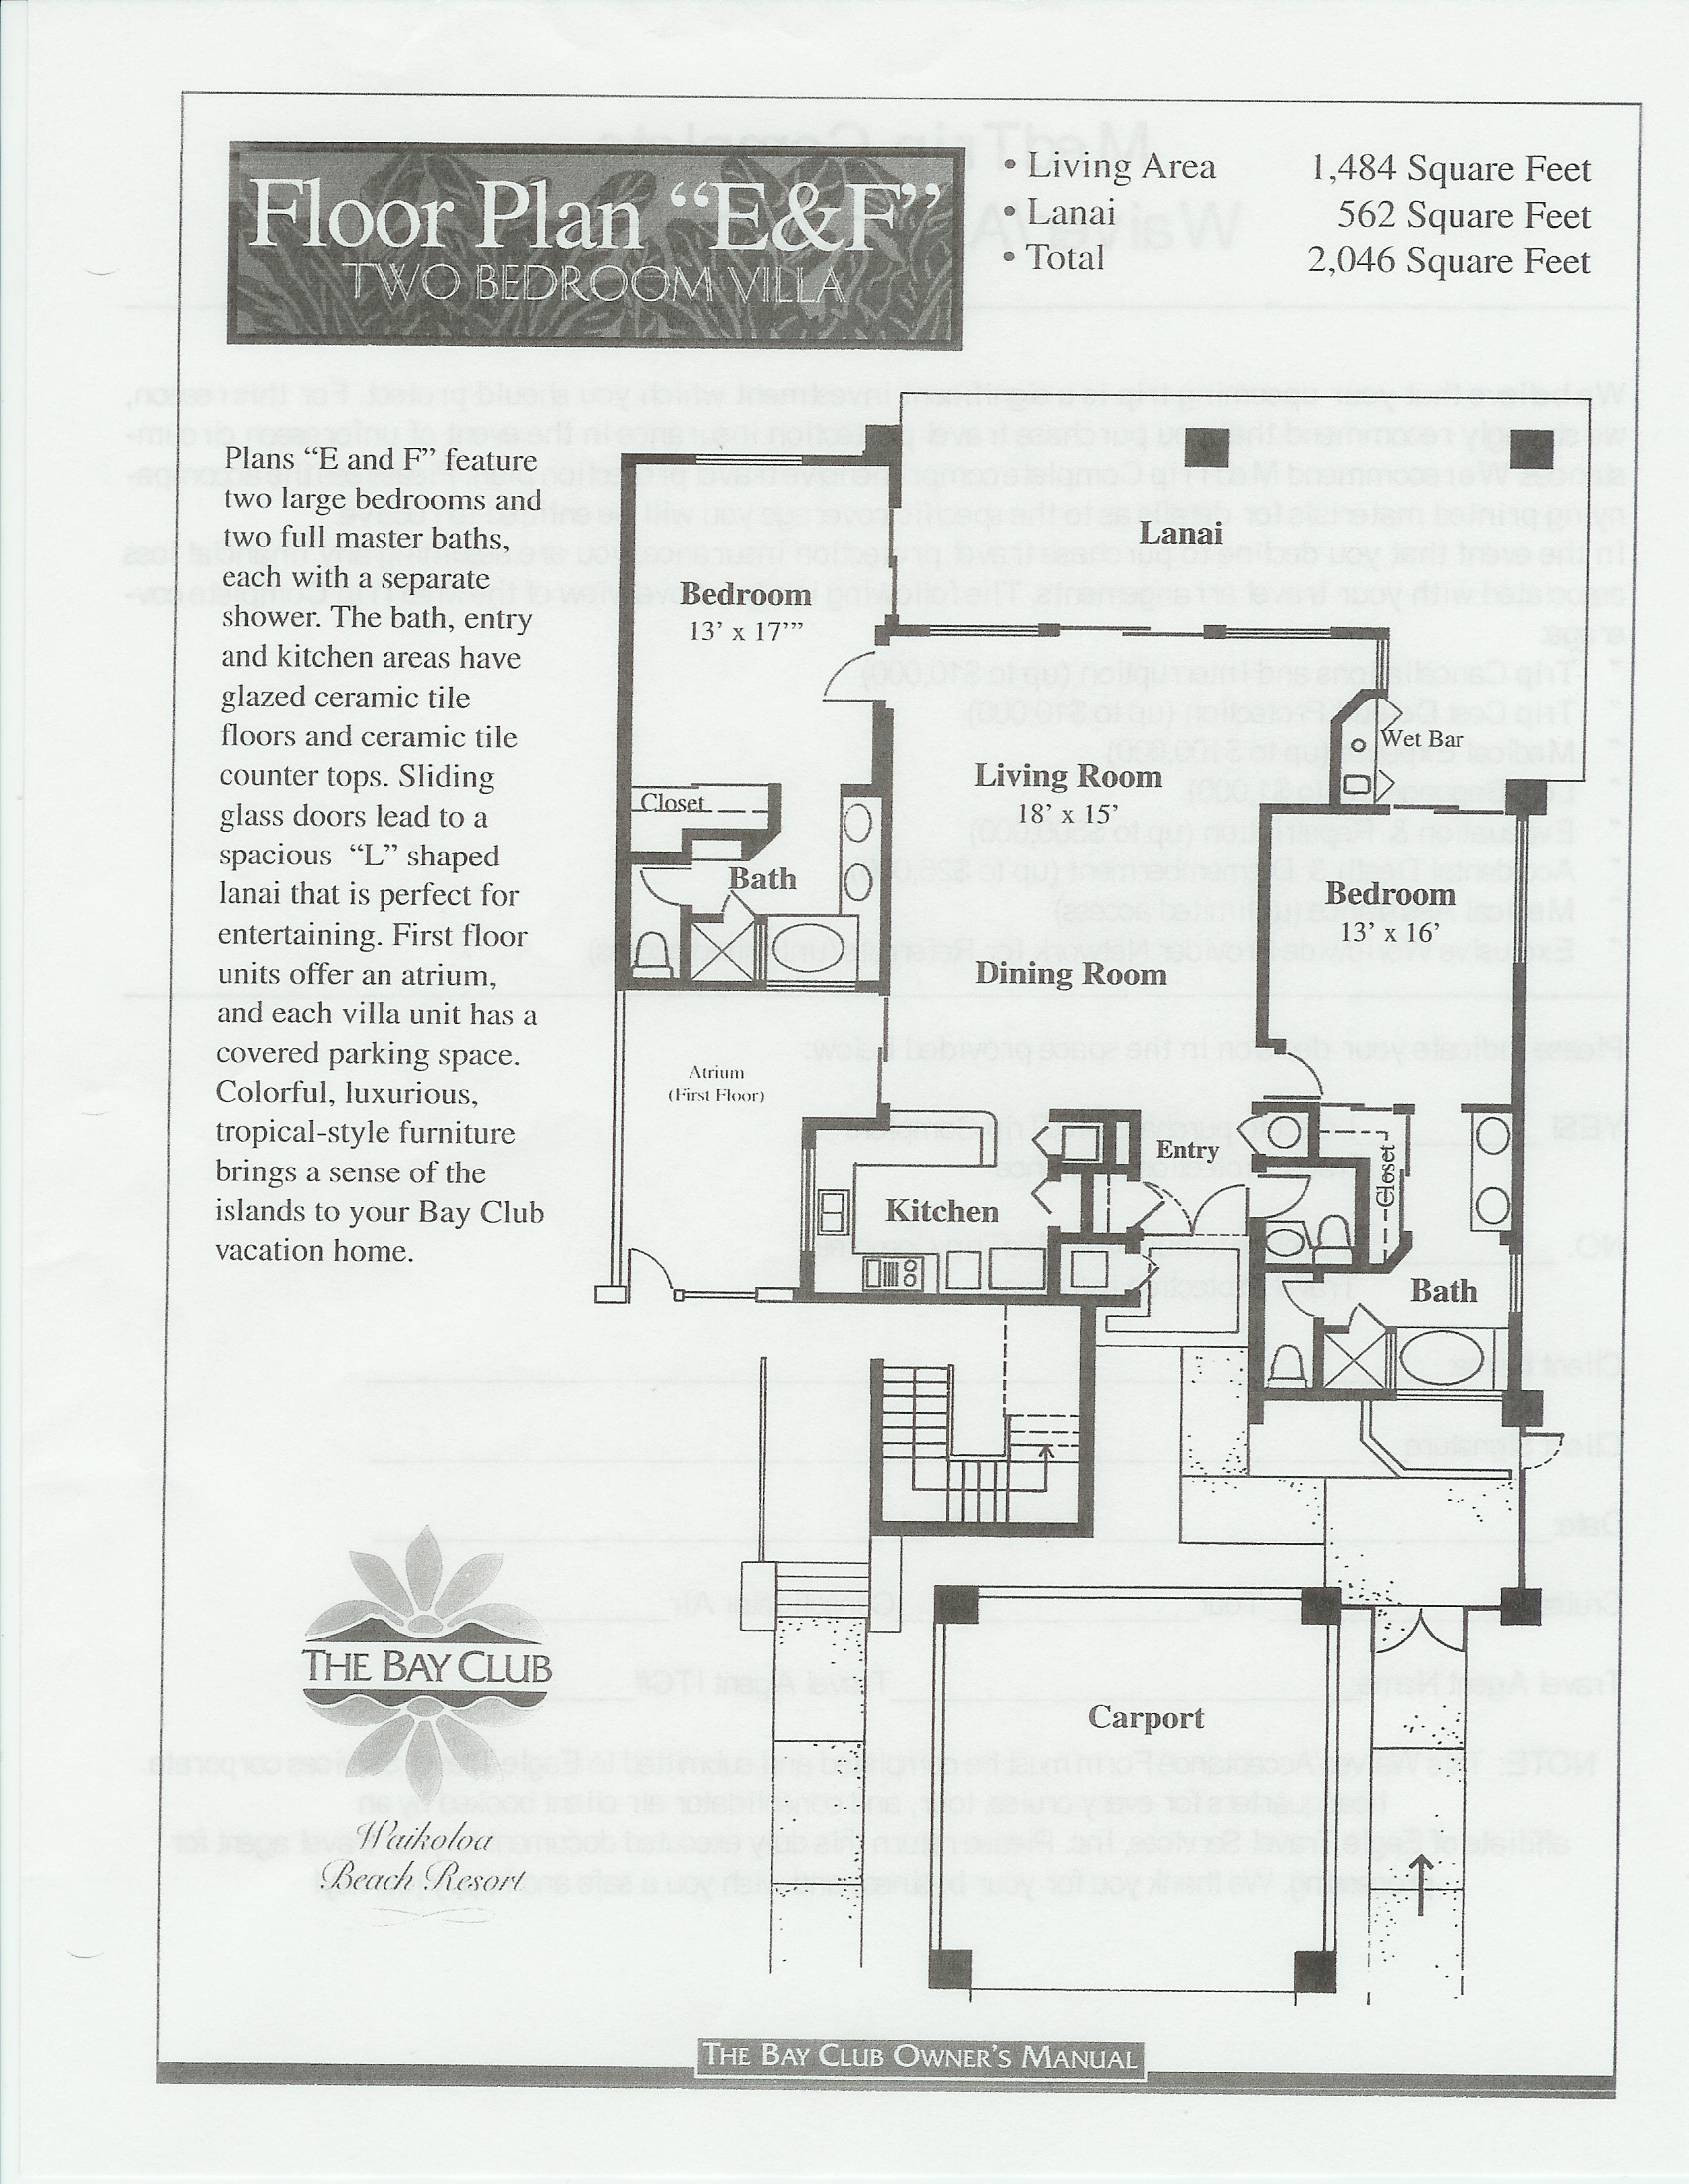 Floor Plan E and F